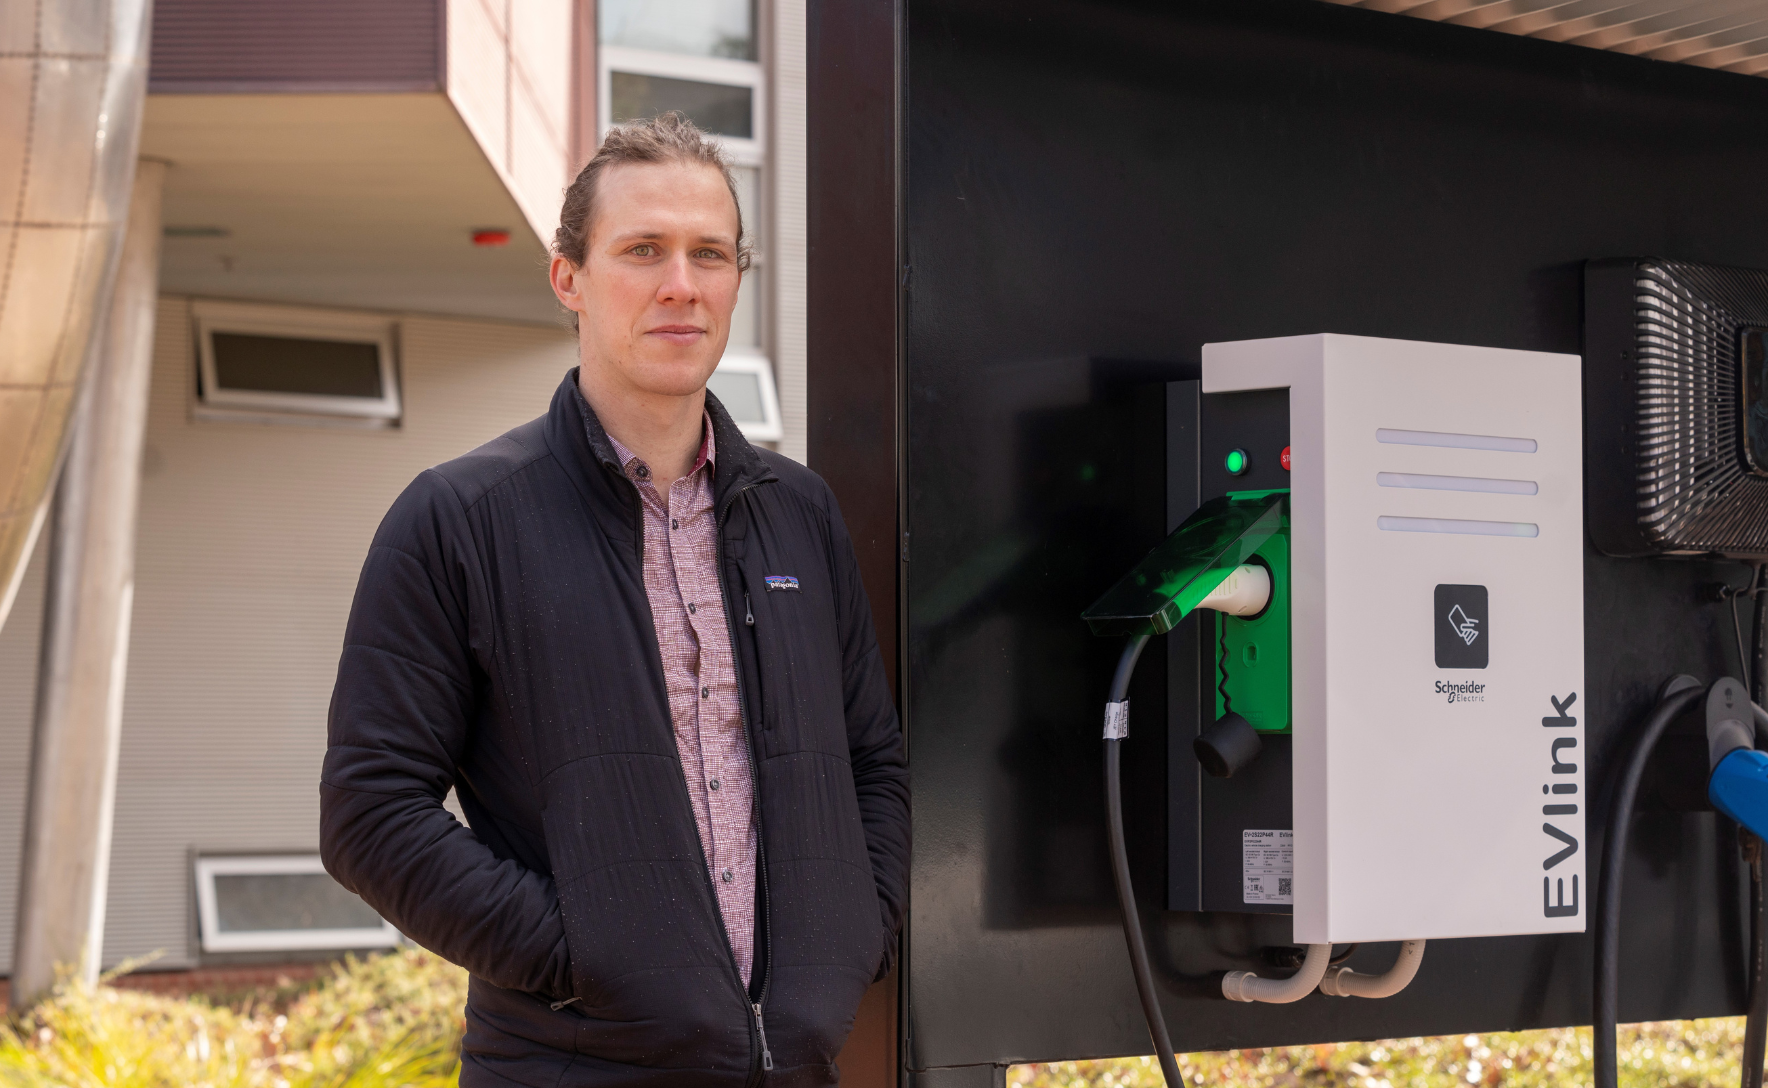 Dr Bjorn Stumberg standing next to an electric vehicle charging station.